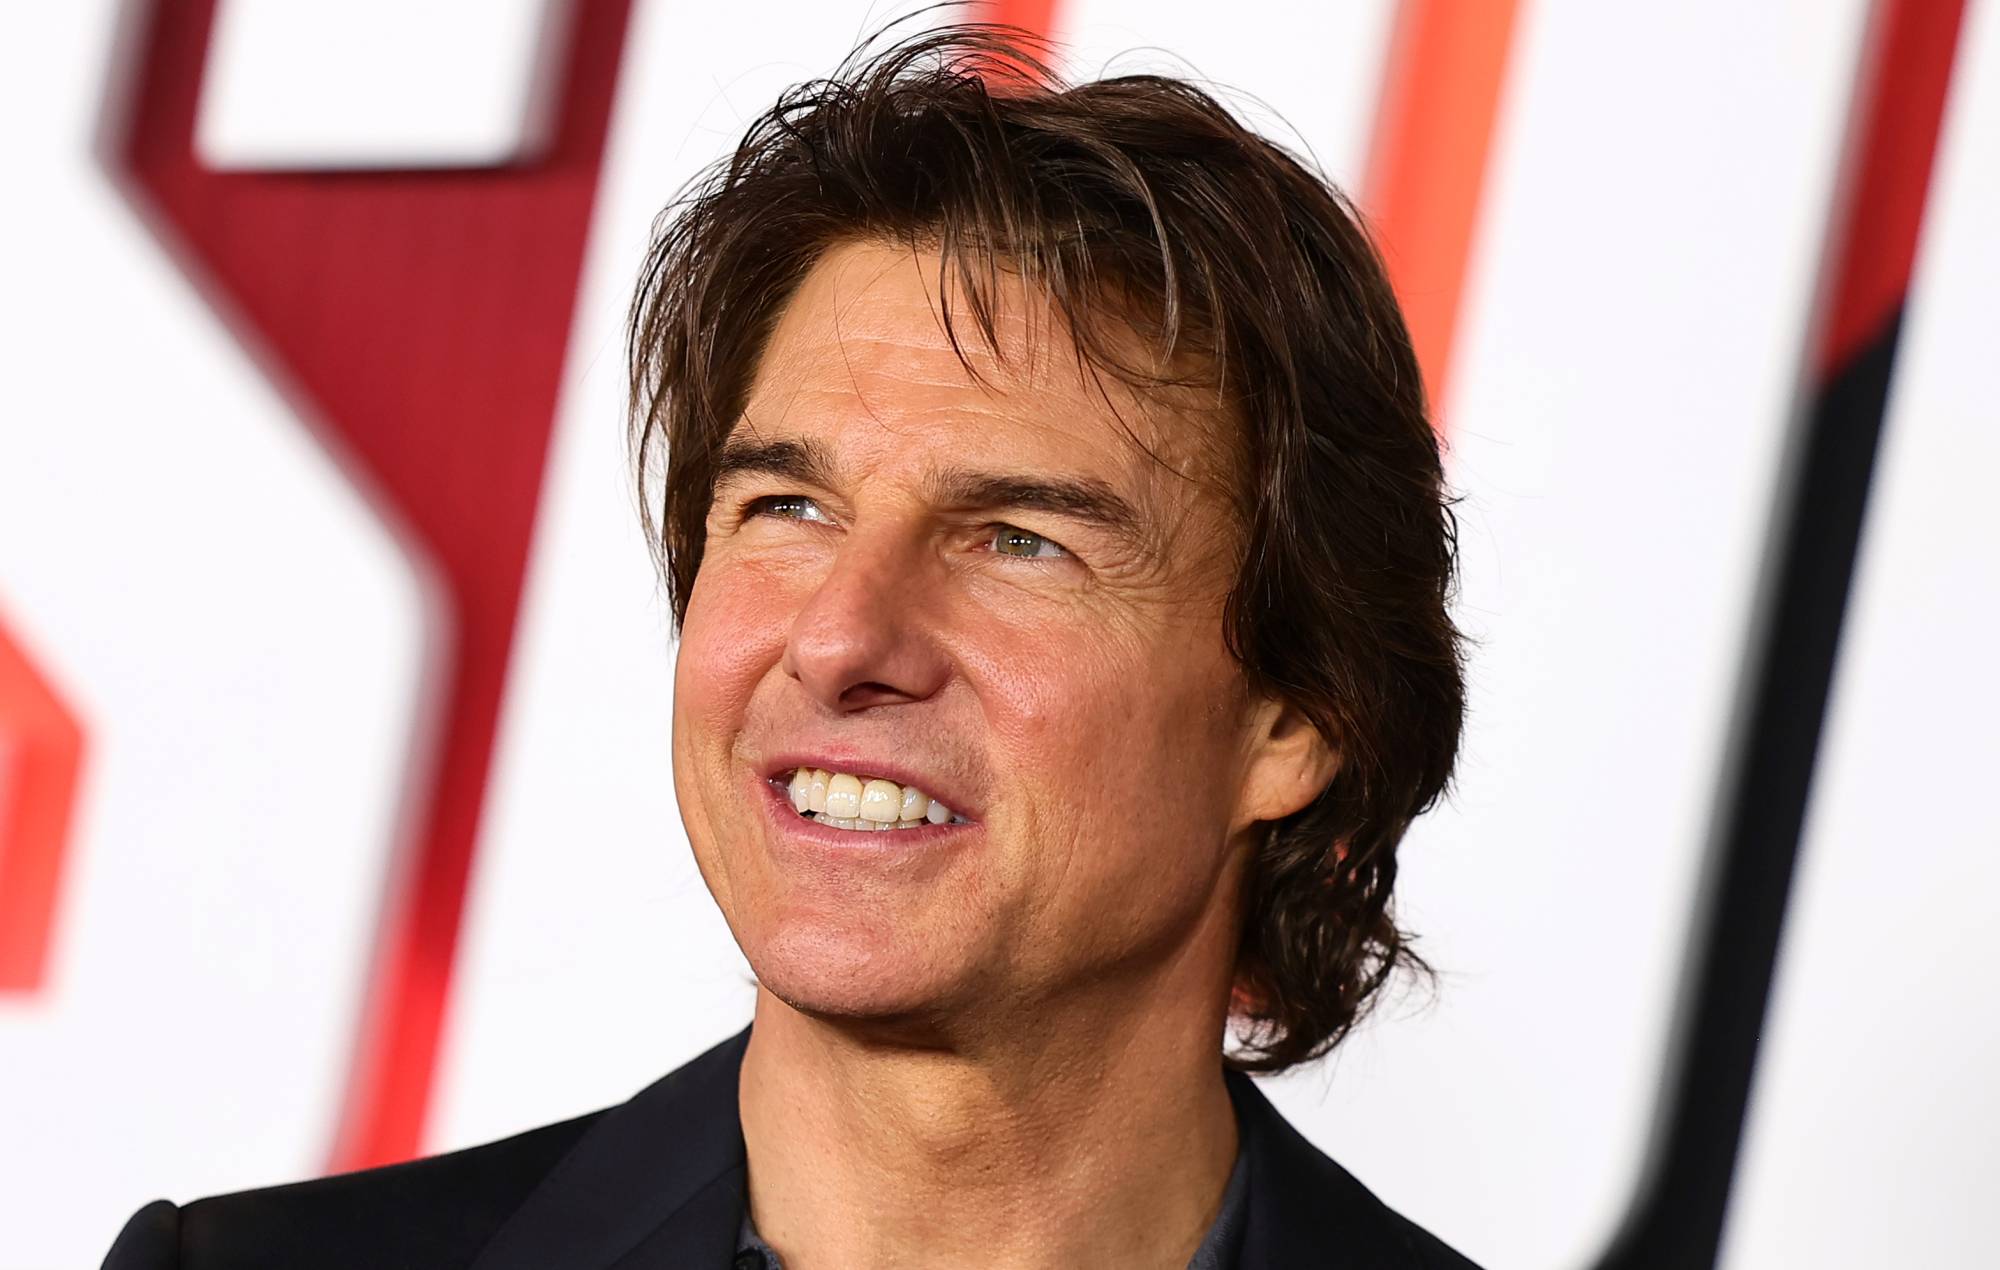 Tom Cruise is sending out hundreds of Christmas cakes as presents